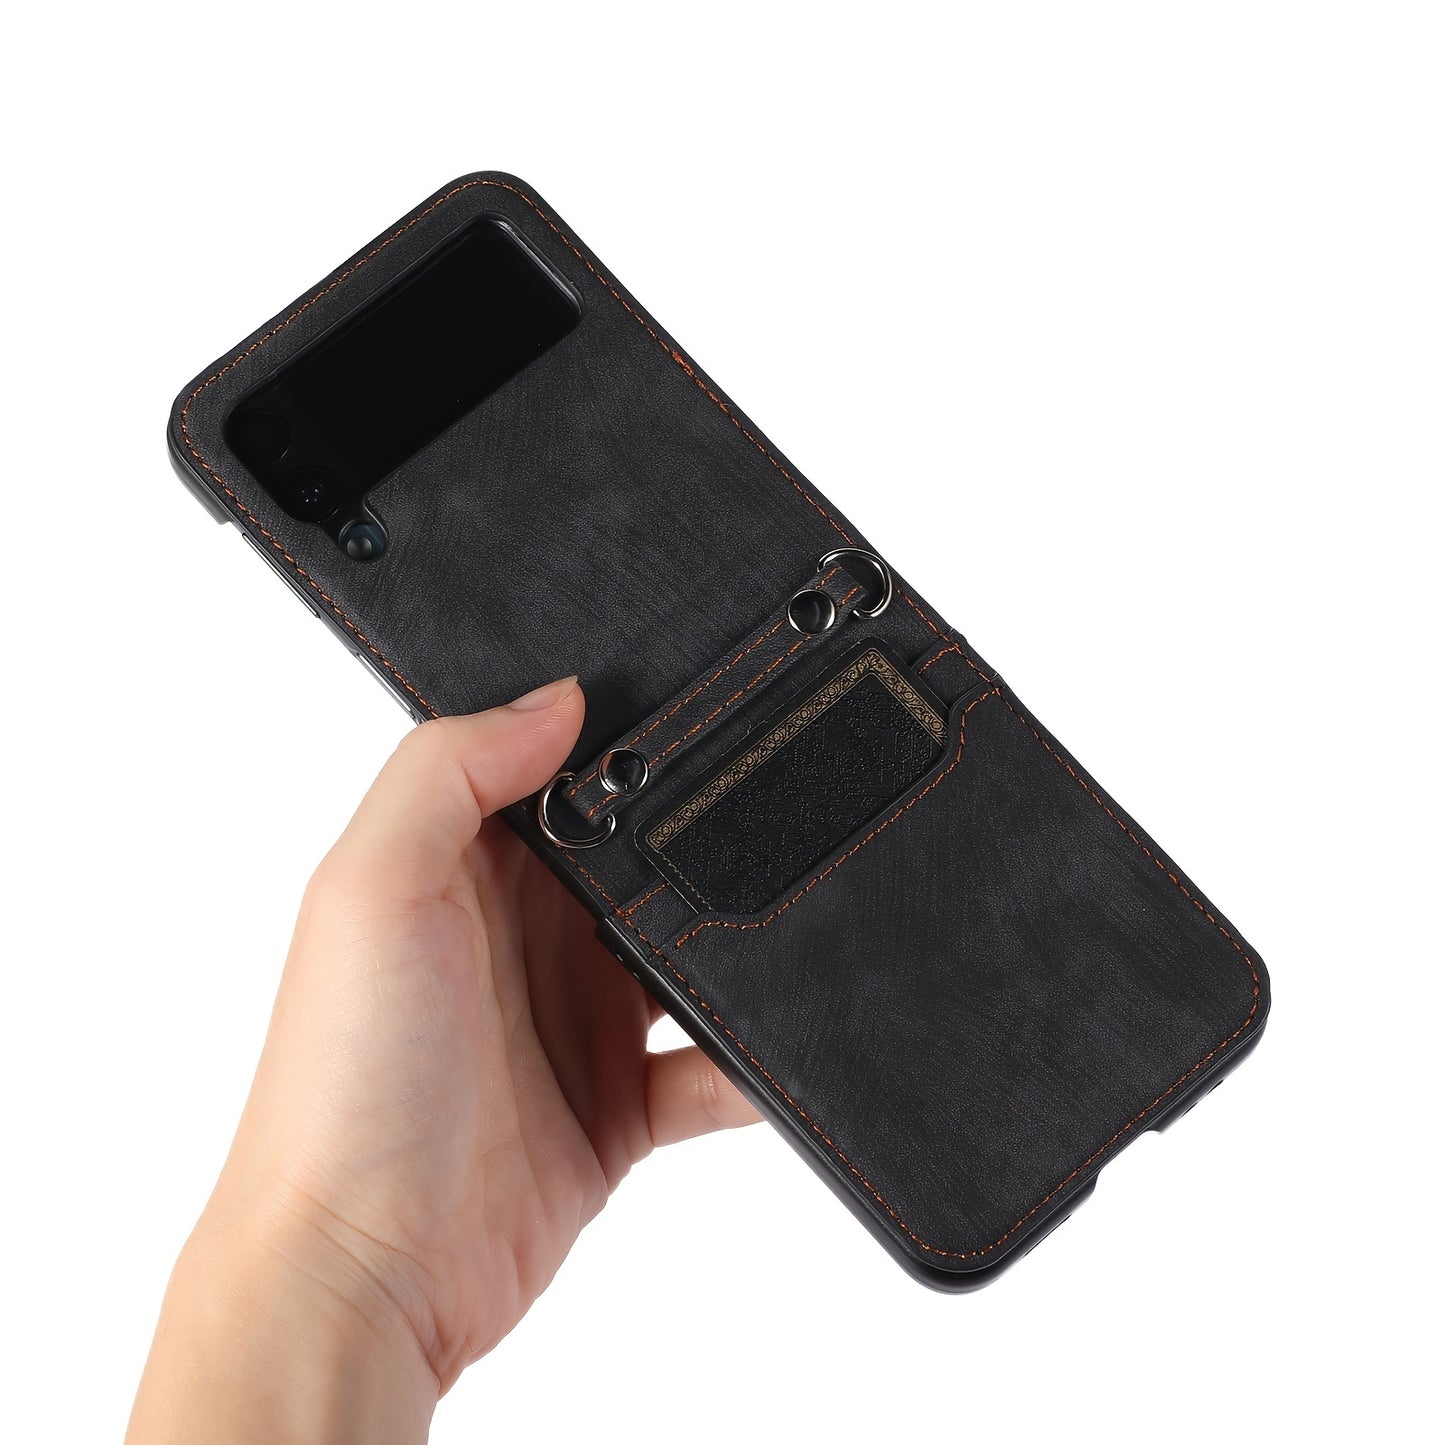 Applicable To Samsung Z Flip 4 Black Mobile Phone Case Folding Screen Full Bag Fall Proof Z Flip 3 Plug-in Card Lanyard Mobile Phone Leather Case